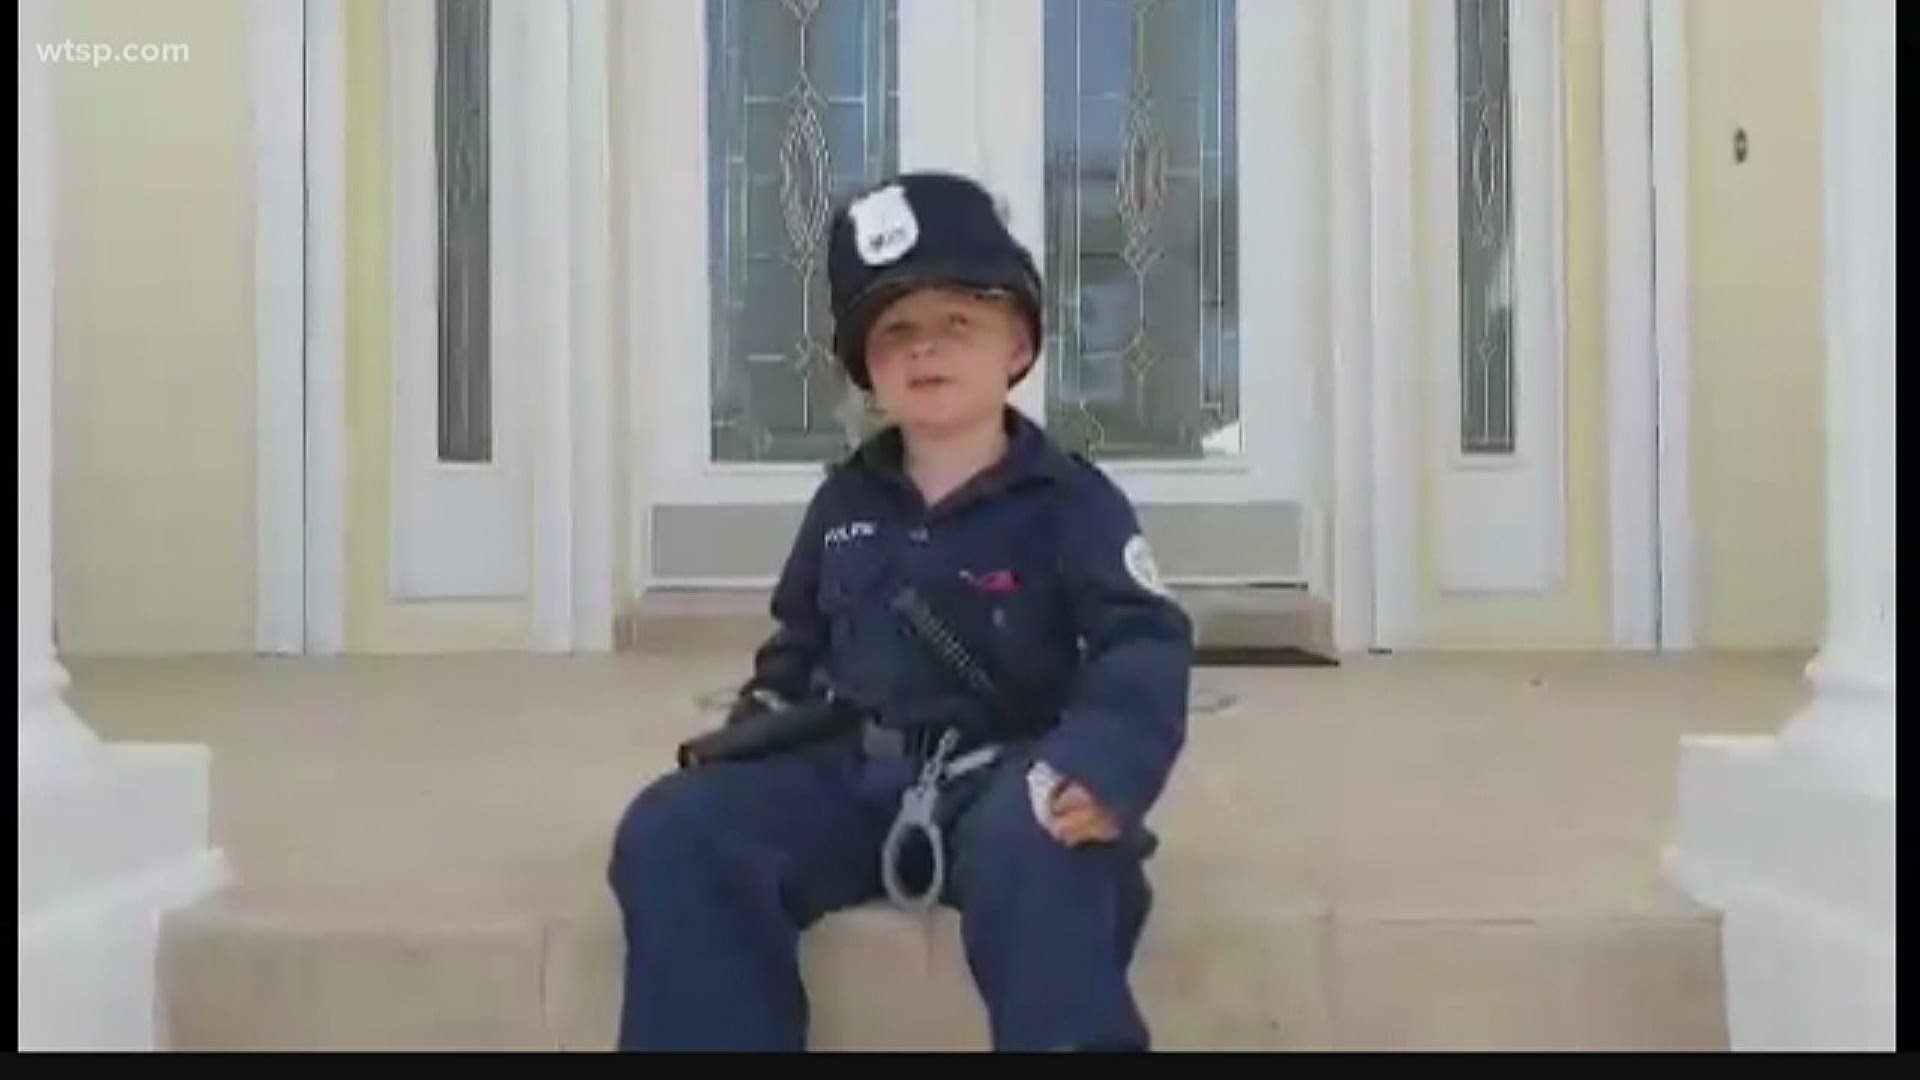 Clearwater Police sergeant Bill Hodgson surprised Matthew Lenhart while the three-year-old was out patrolling the neighborhood in a Halloween costume.